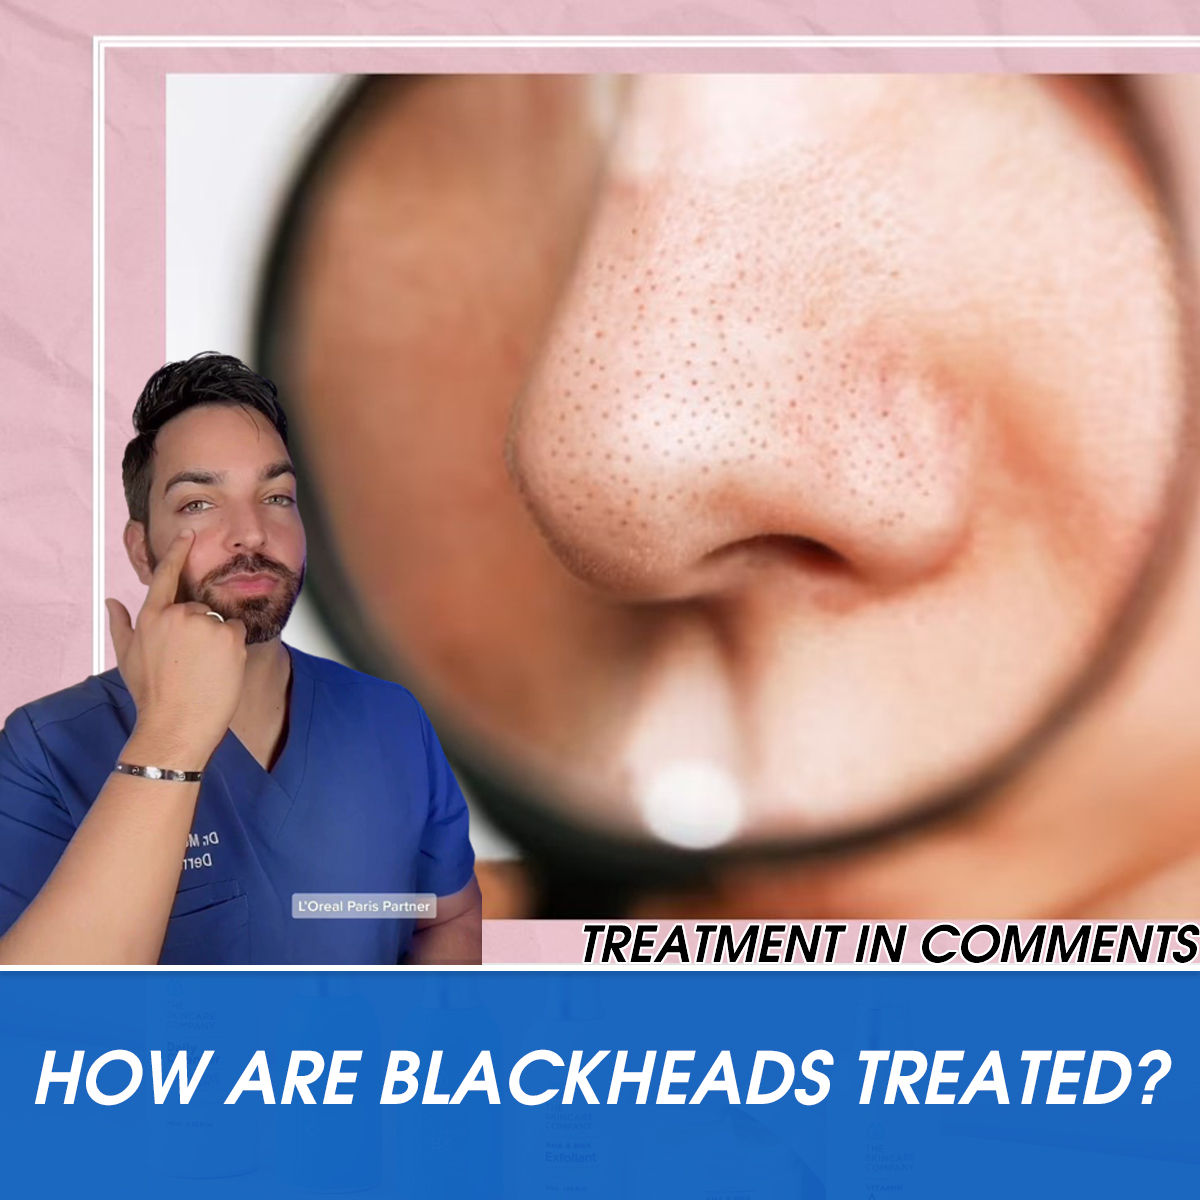 How Are Blackheads Treated?